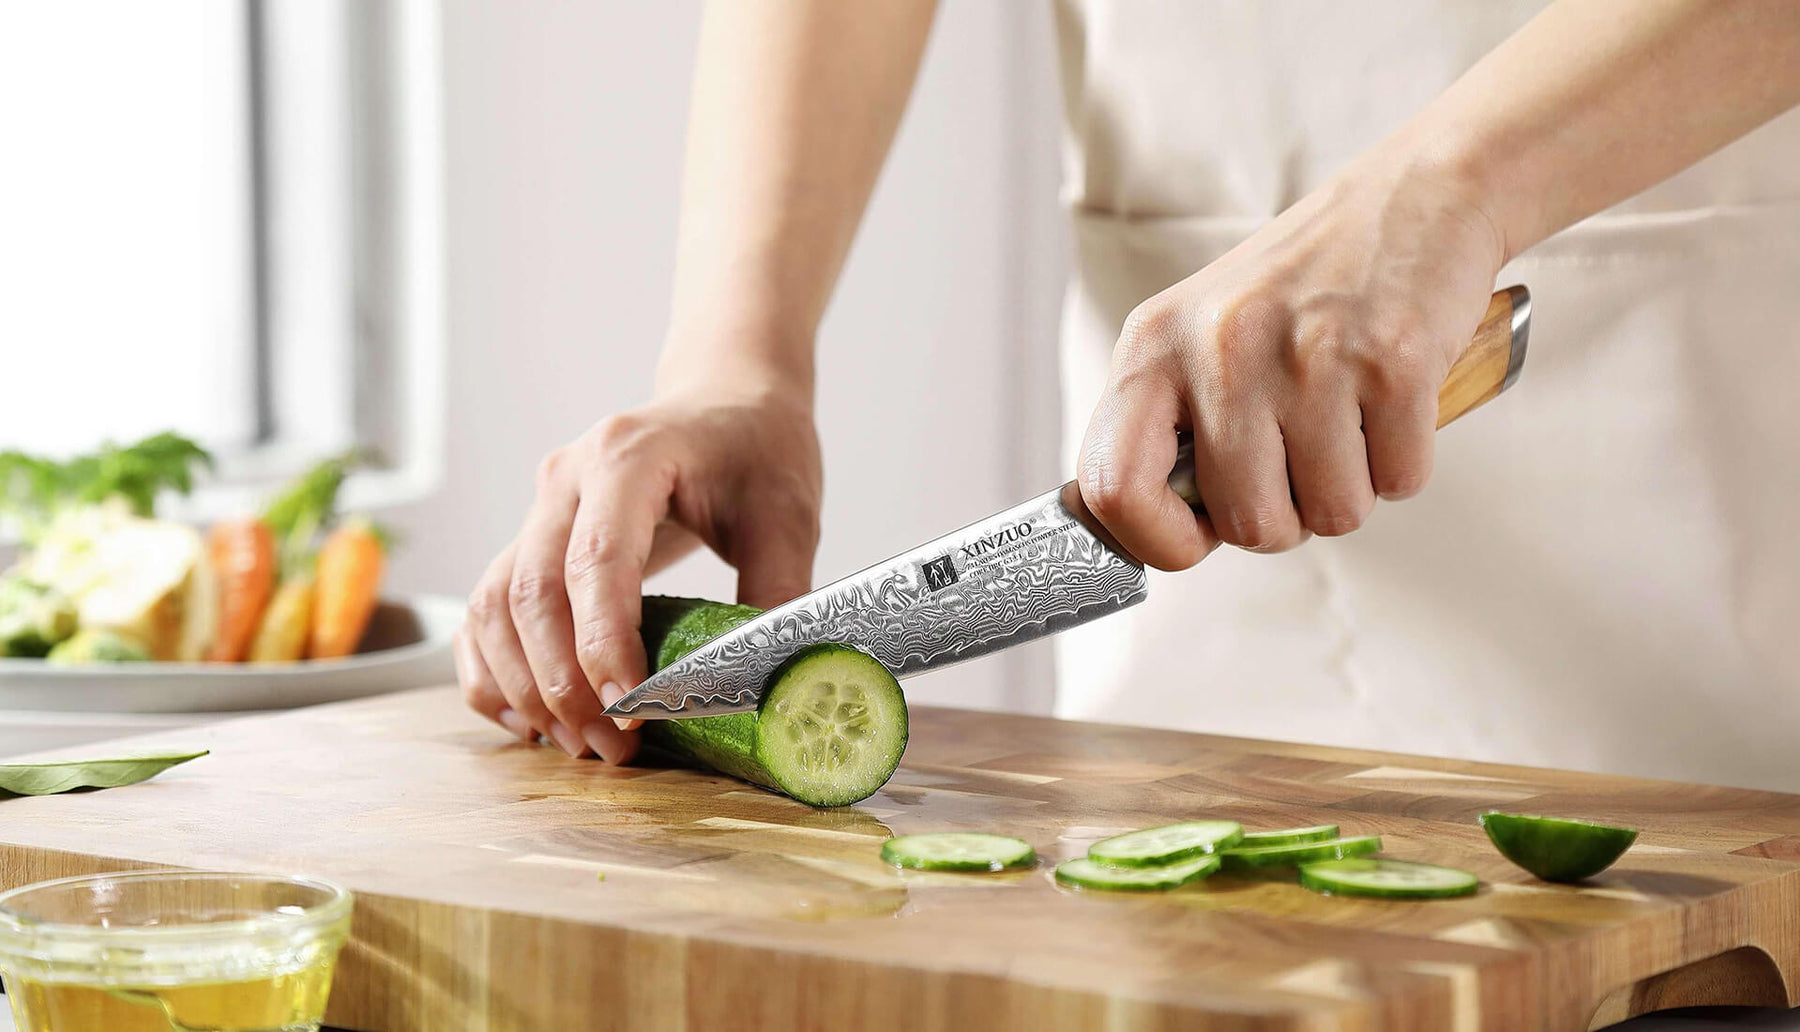 What is a Paring Knife Used For